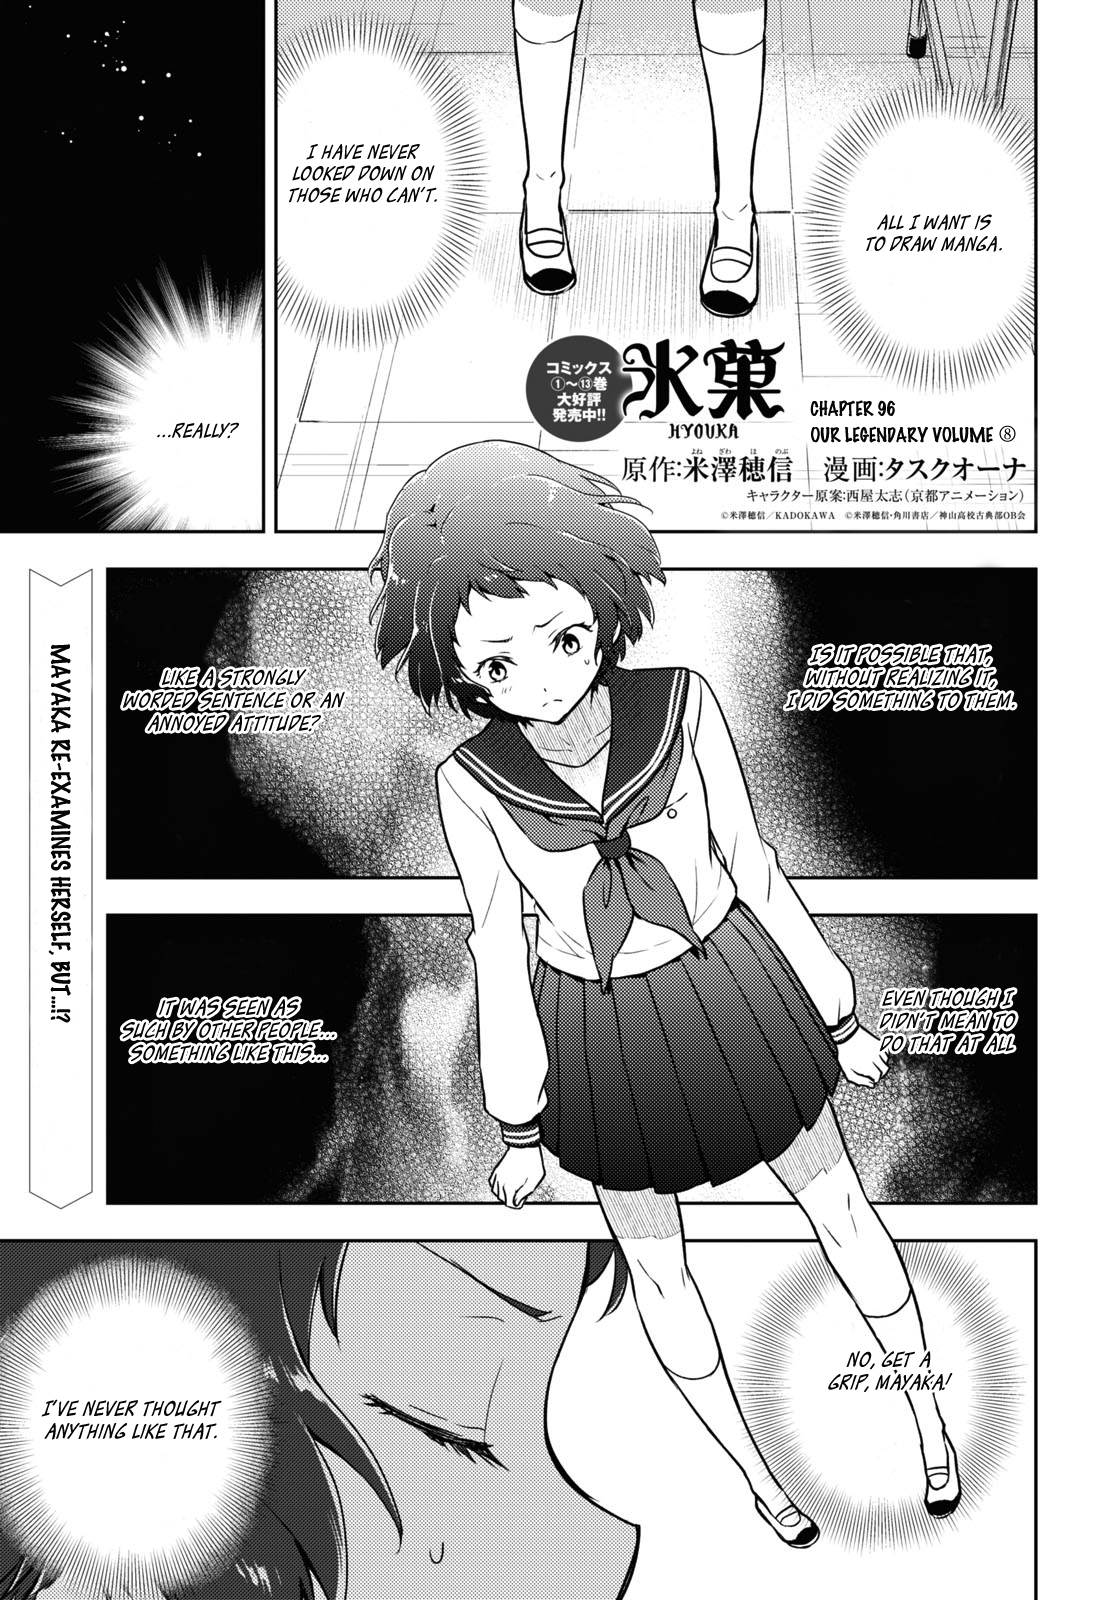 Hyouka Chapter 96: Our Legendary Volume ⑧ - Picture 1